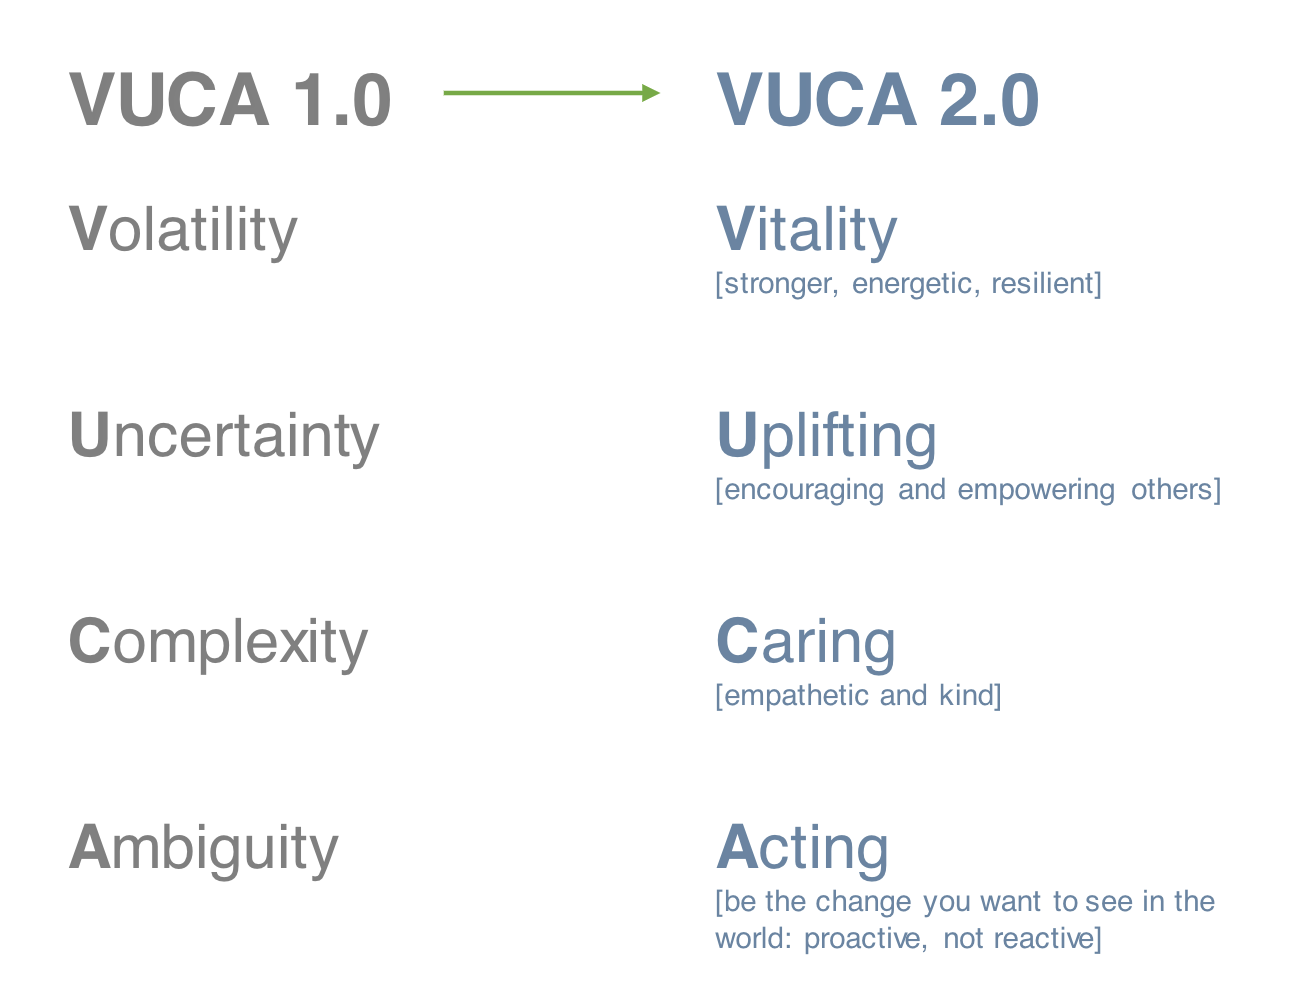 A graphic that visualizes the transformation from “VUCA 1.0” (volatility, uncertainty, complexity, and ambiguity) to “VUCA 2.0” (vitality, uplifting, caring, acting)